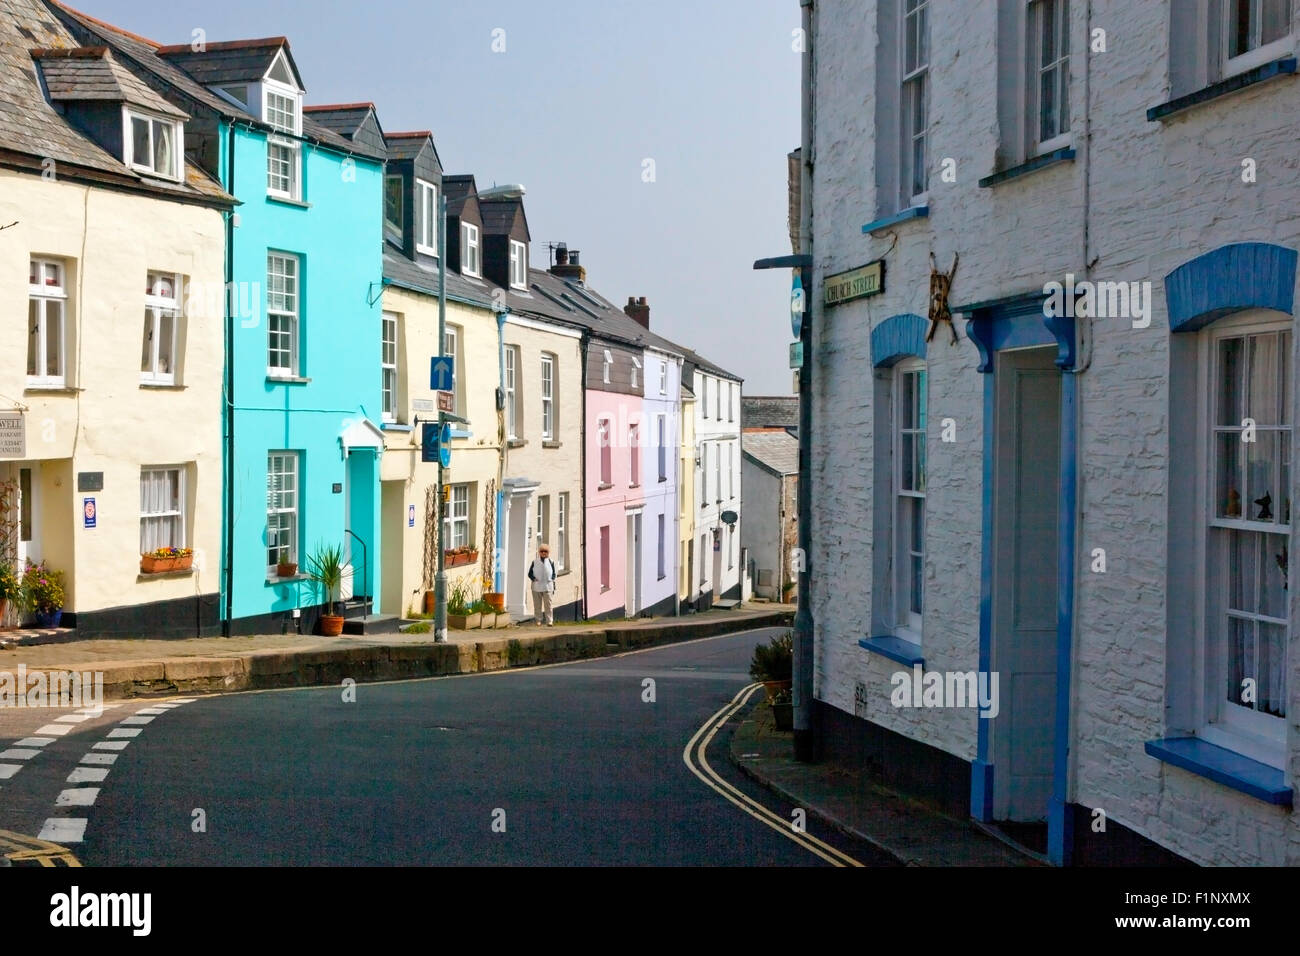 Colourful terraces of cottages in Duke Street and Church Street, Padstow, Cornwall, England, UK Stock Photo